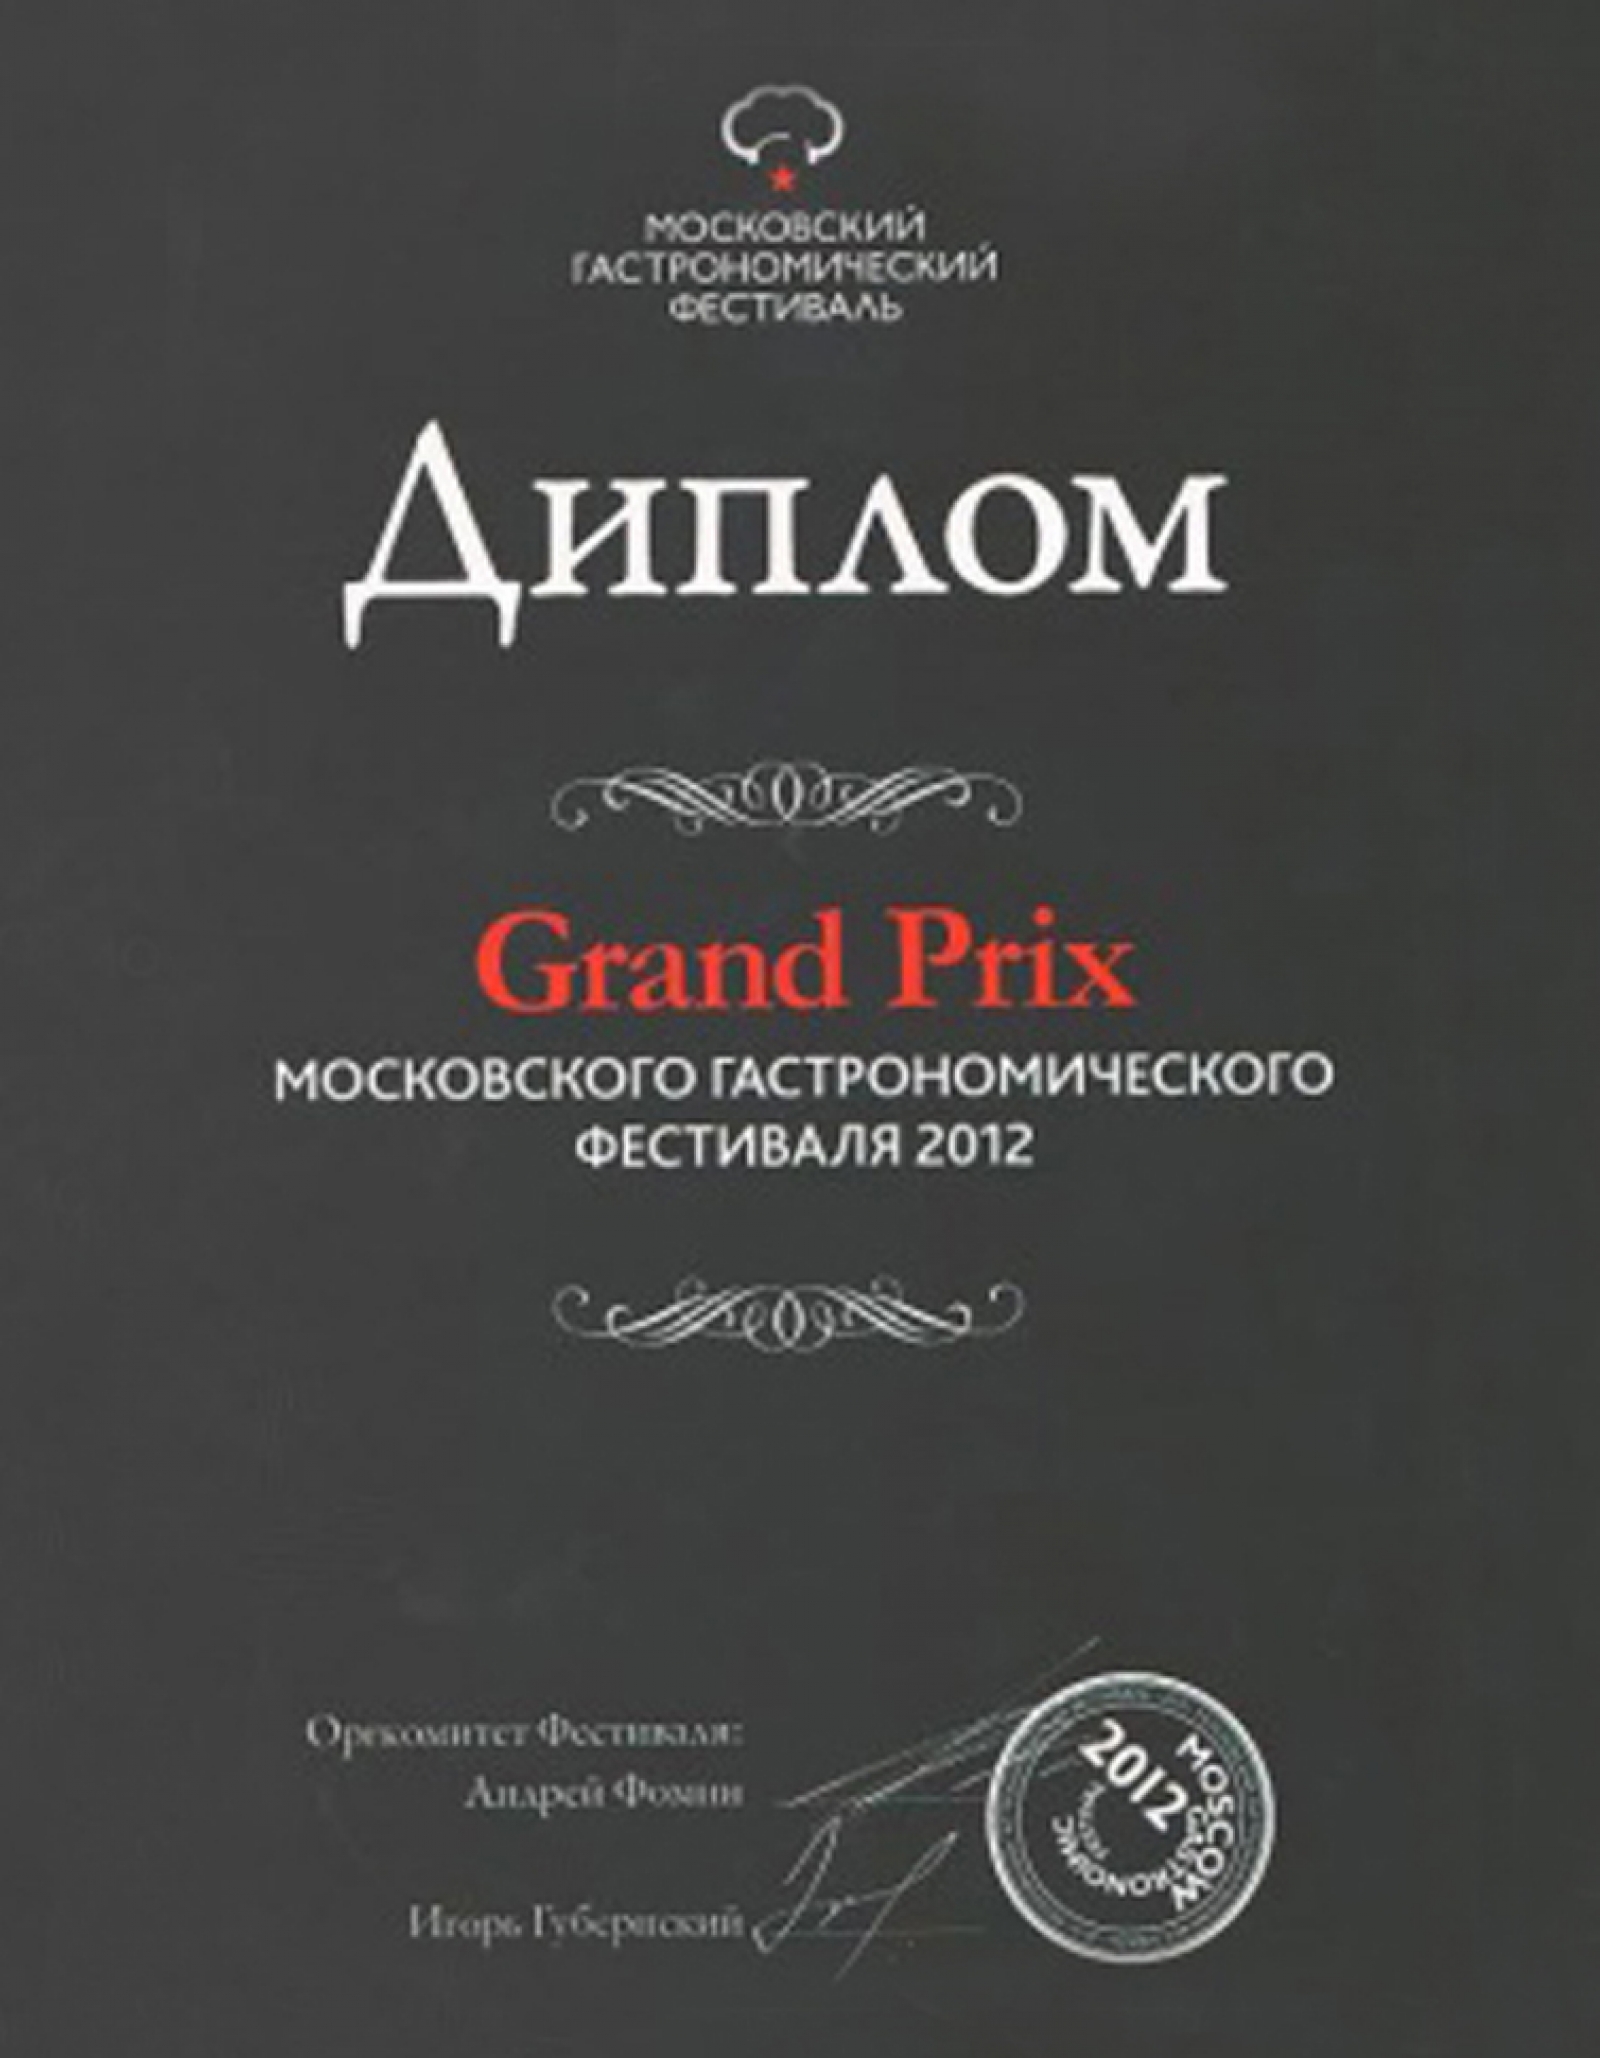 GRAND PRIX AT THE MOSCOW BALL DESSERT FOOD FESTIVAL